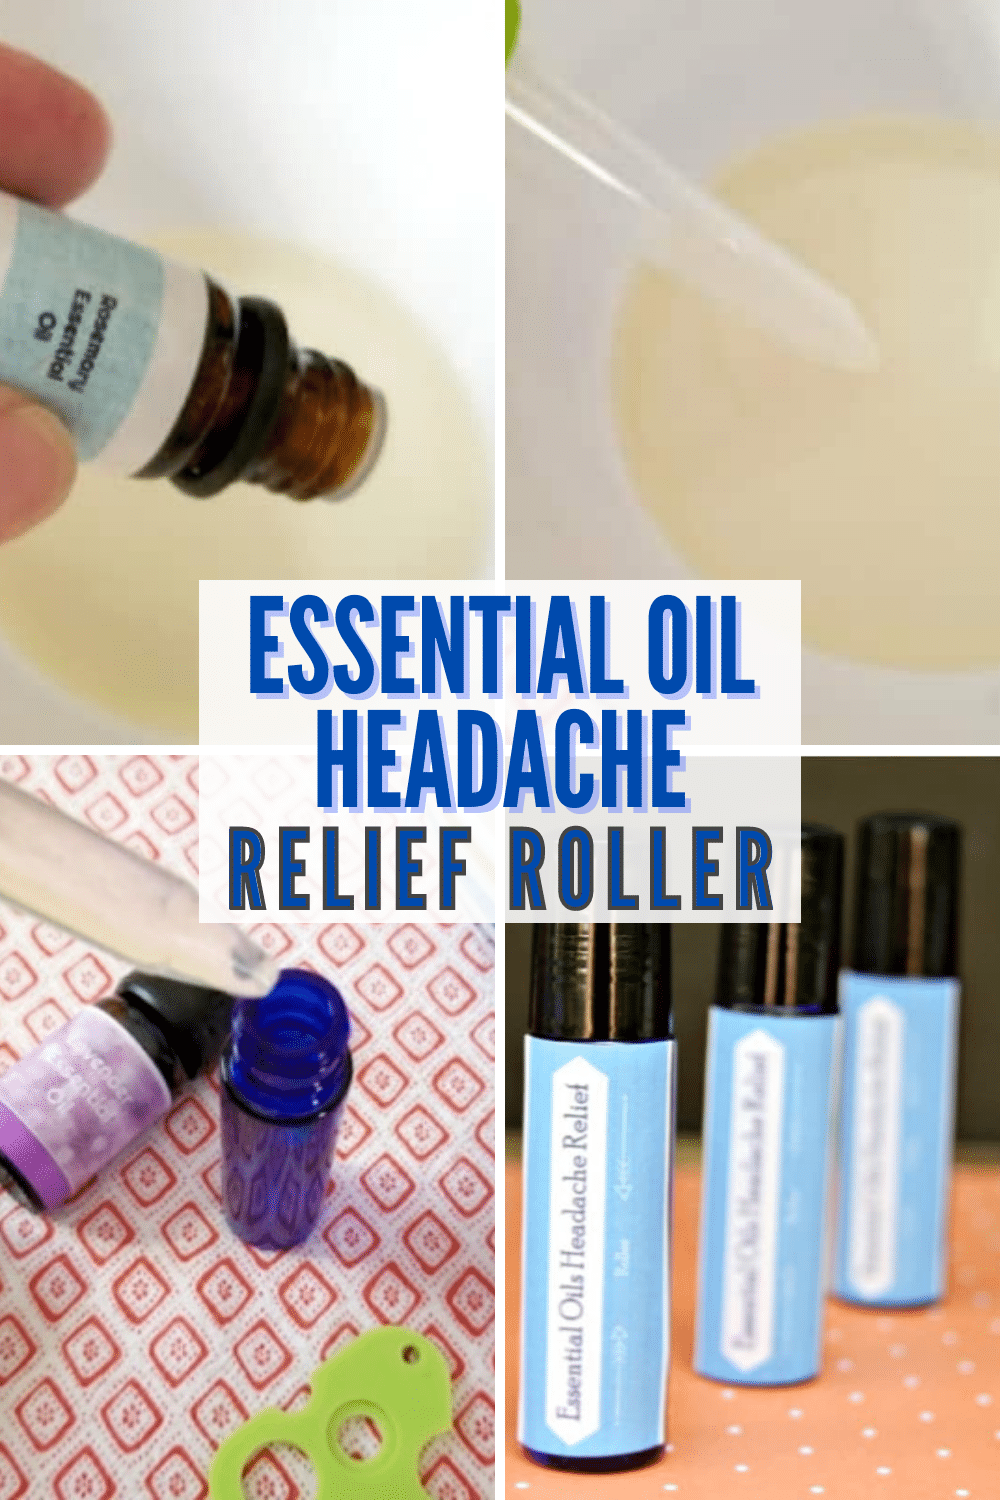 An essential oil headache relief roller can be very handy to keep around the house when a headache flairs up. It is so fast and easy to make a DIY oil roller right at home. #diy #essentialoil #headacherelief via @wondermomwannab